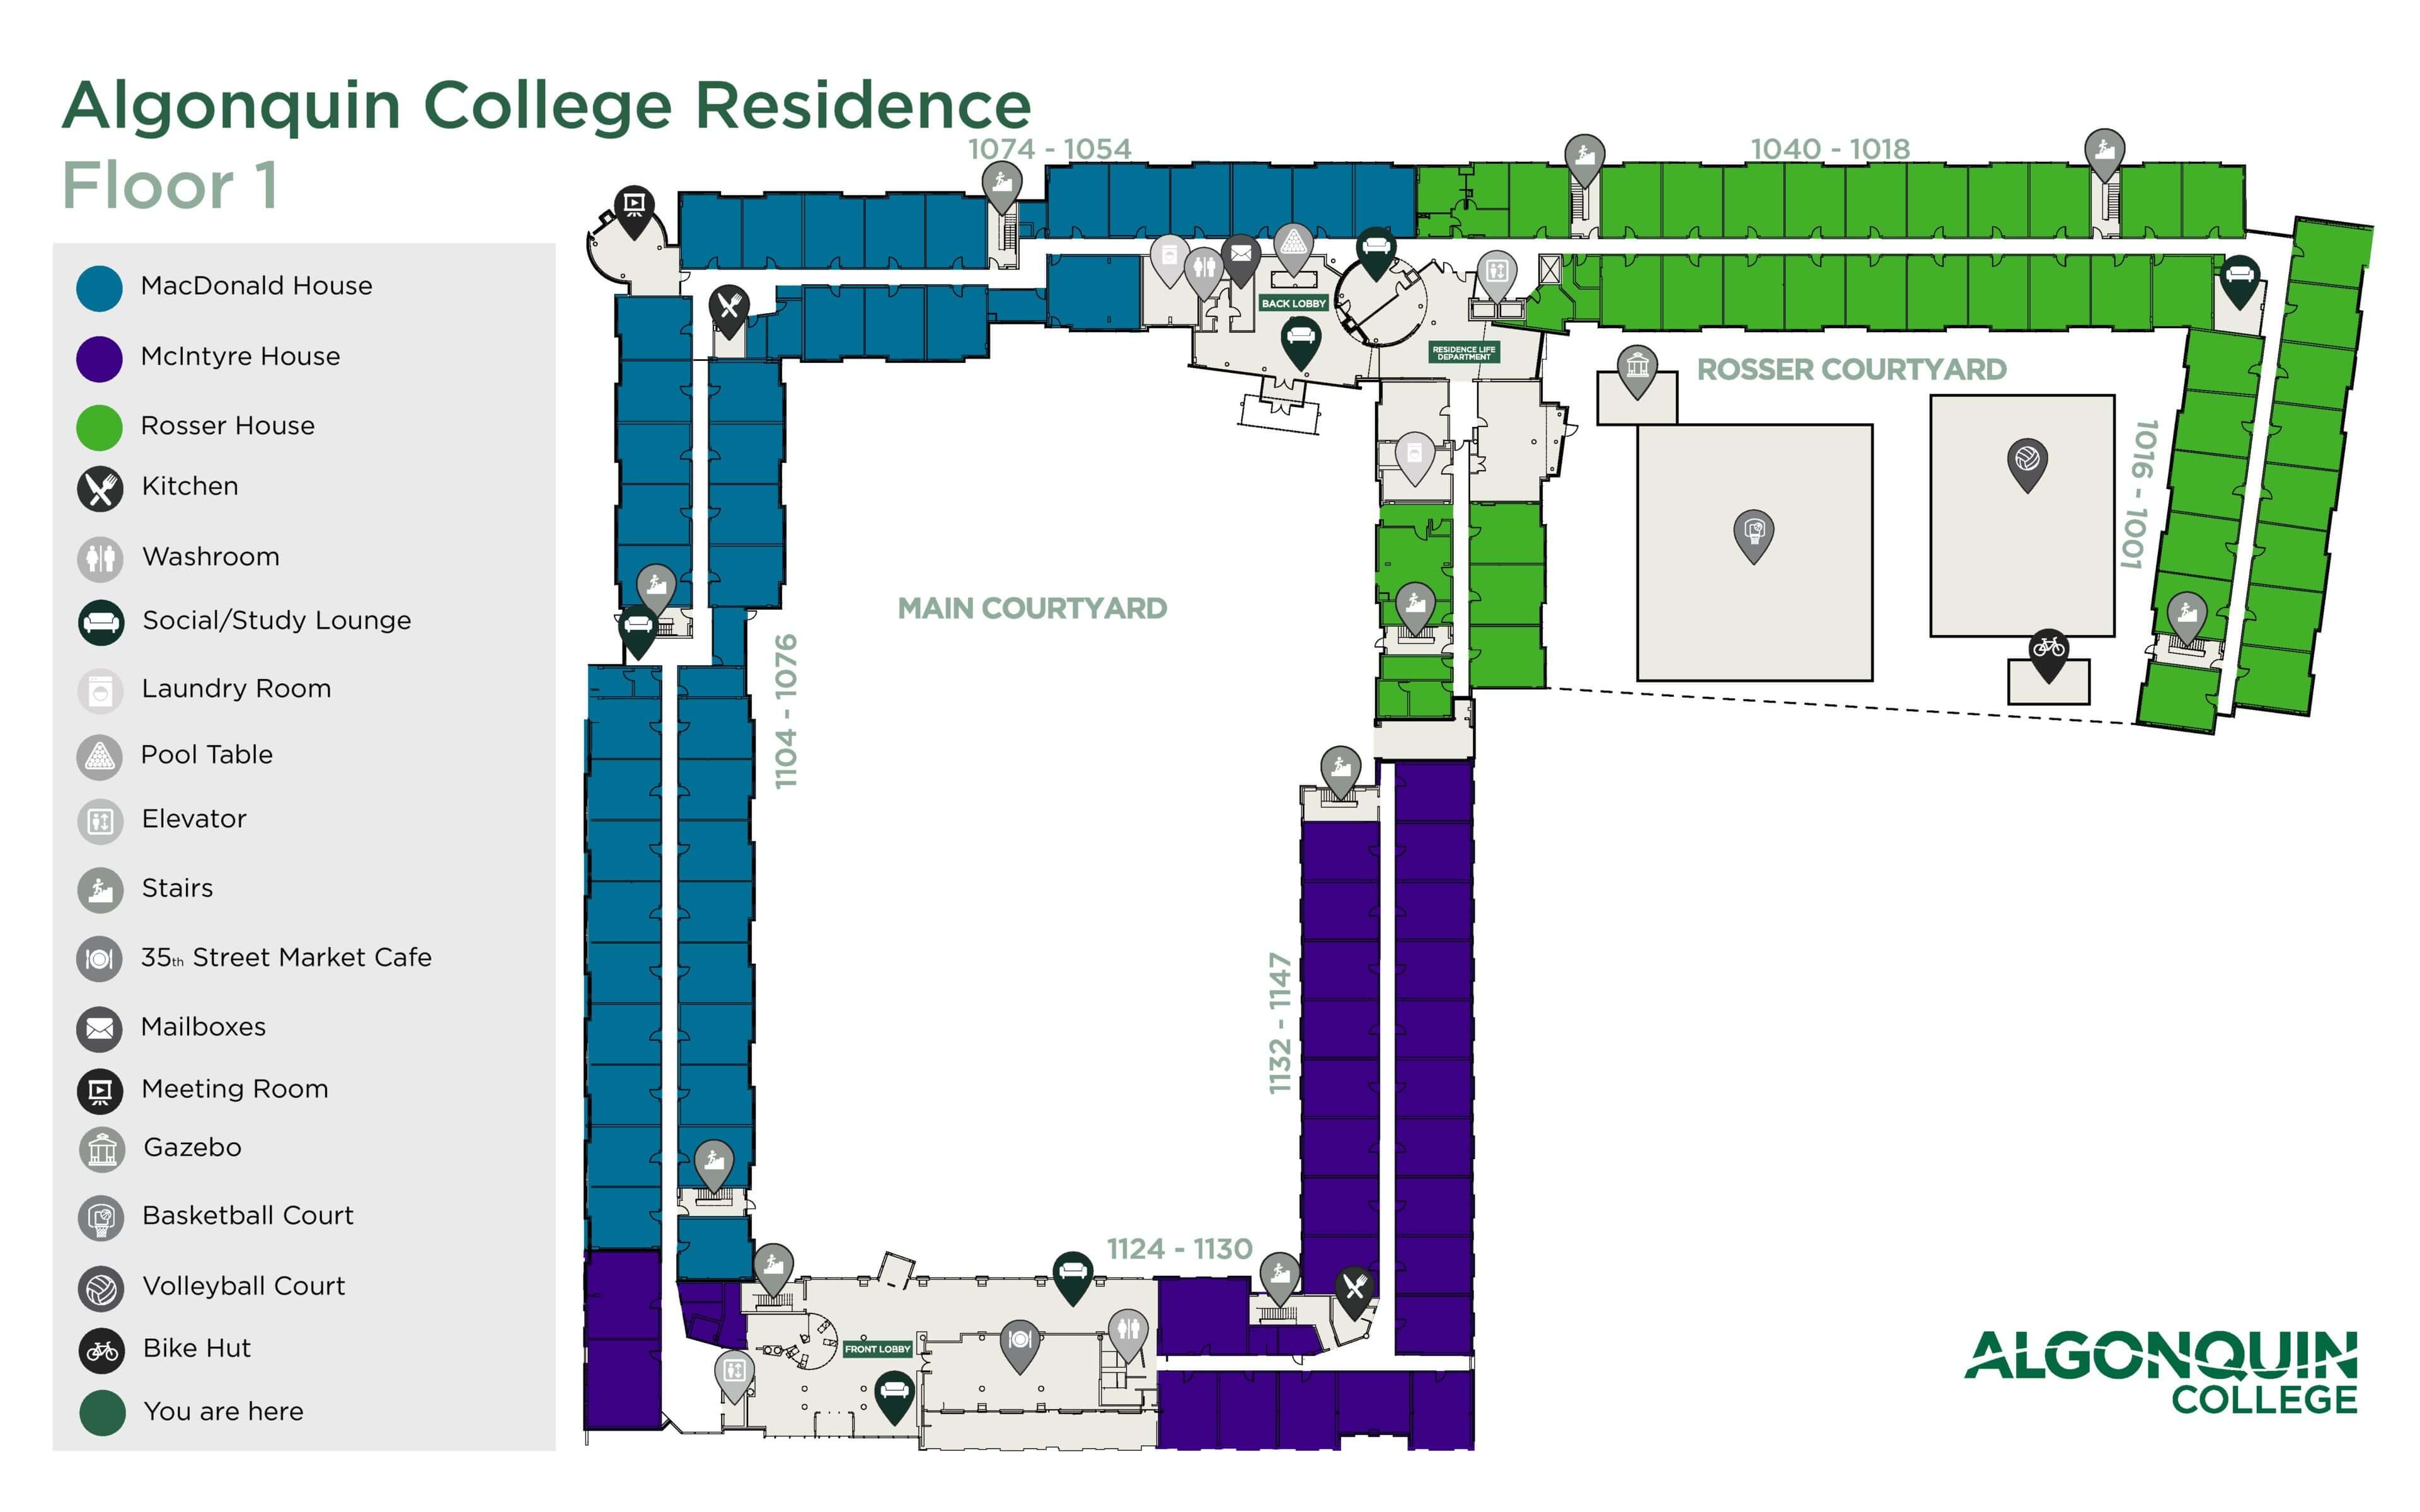 Algonquin Map Floor 1 2020 Update With Rosser Courtyard 40x25 Page 001 